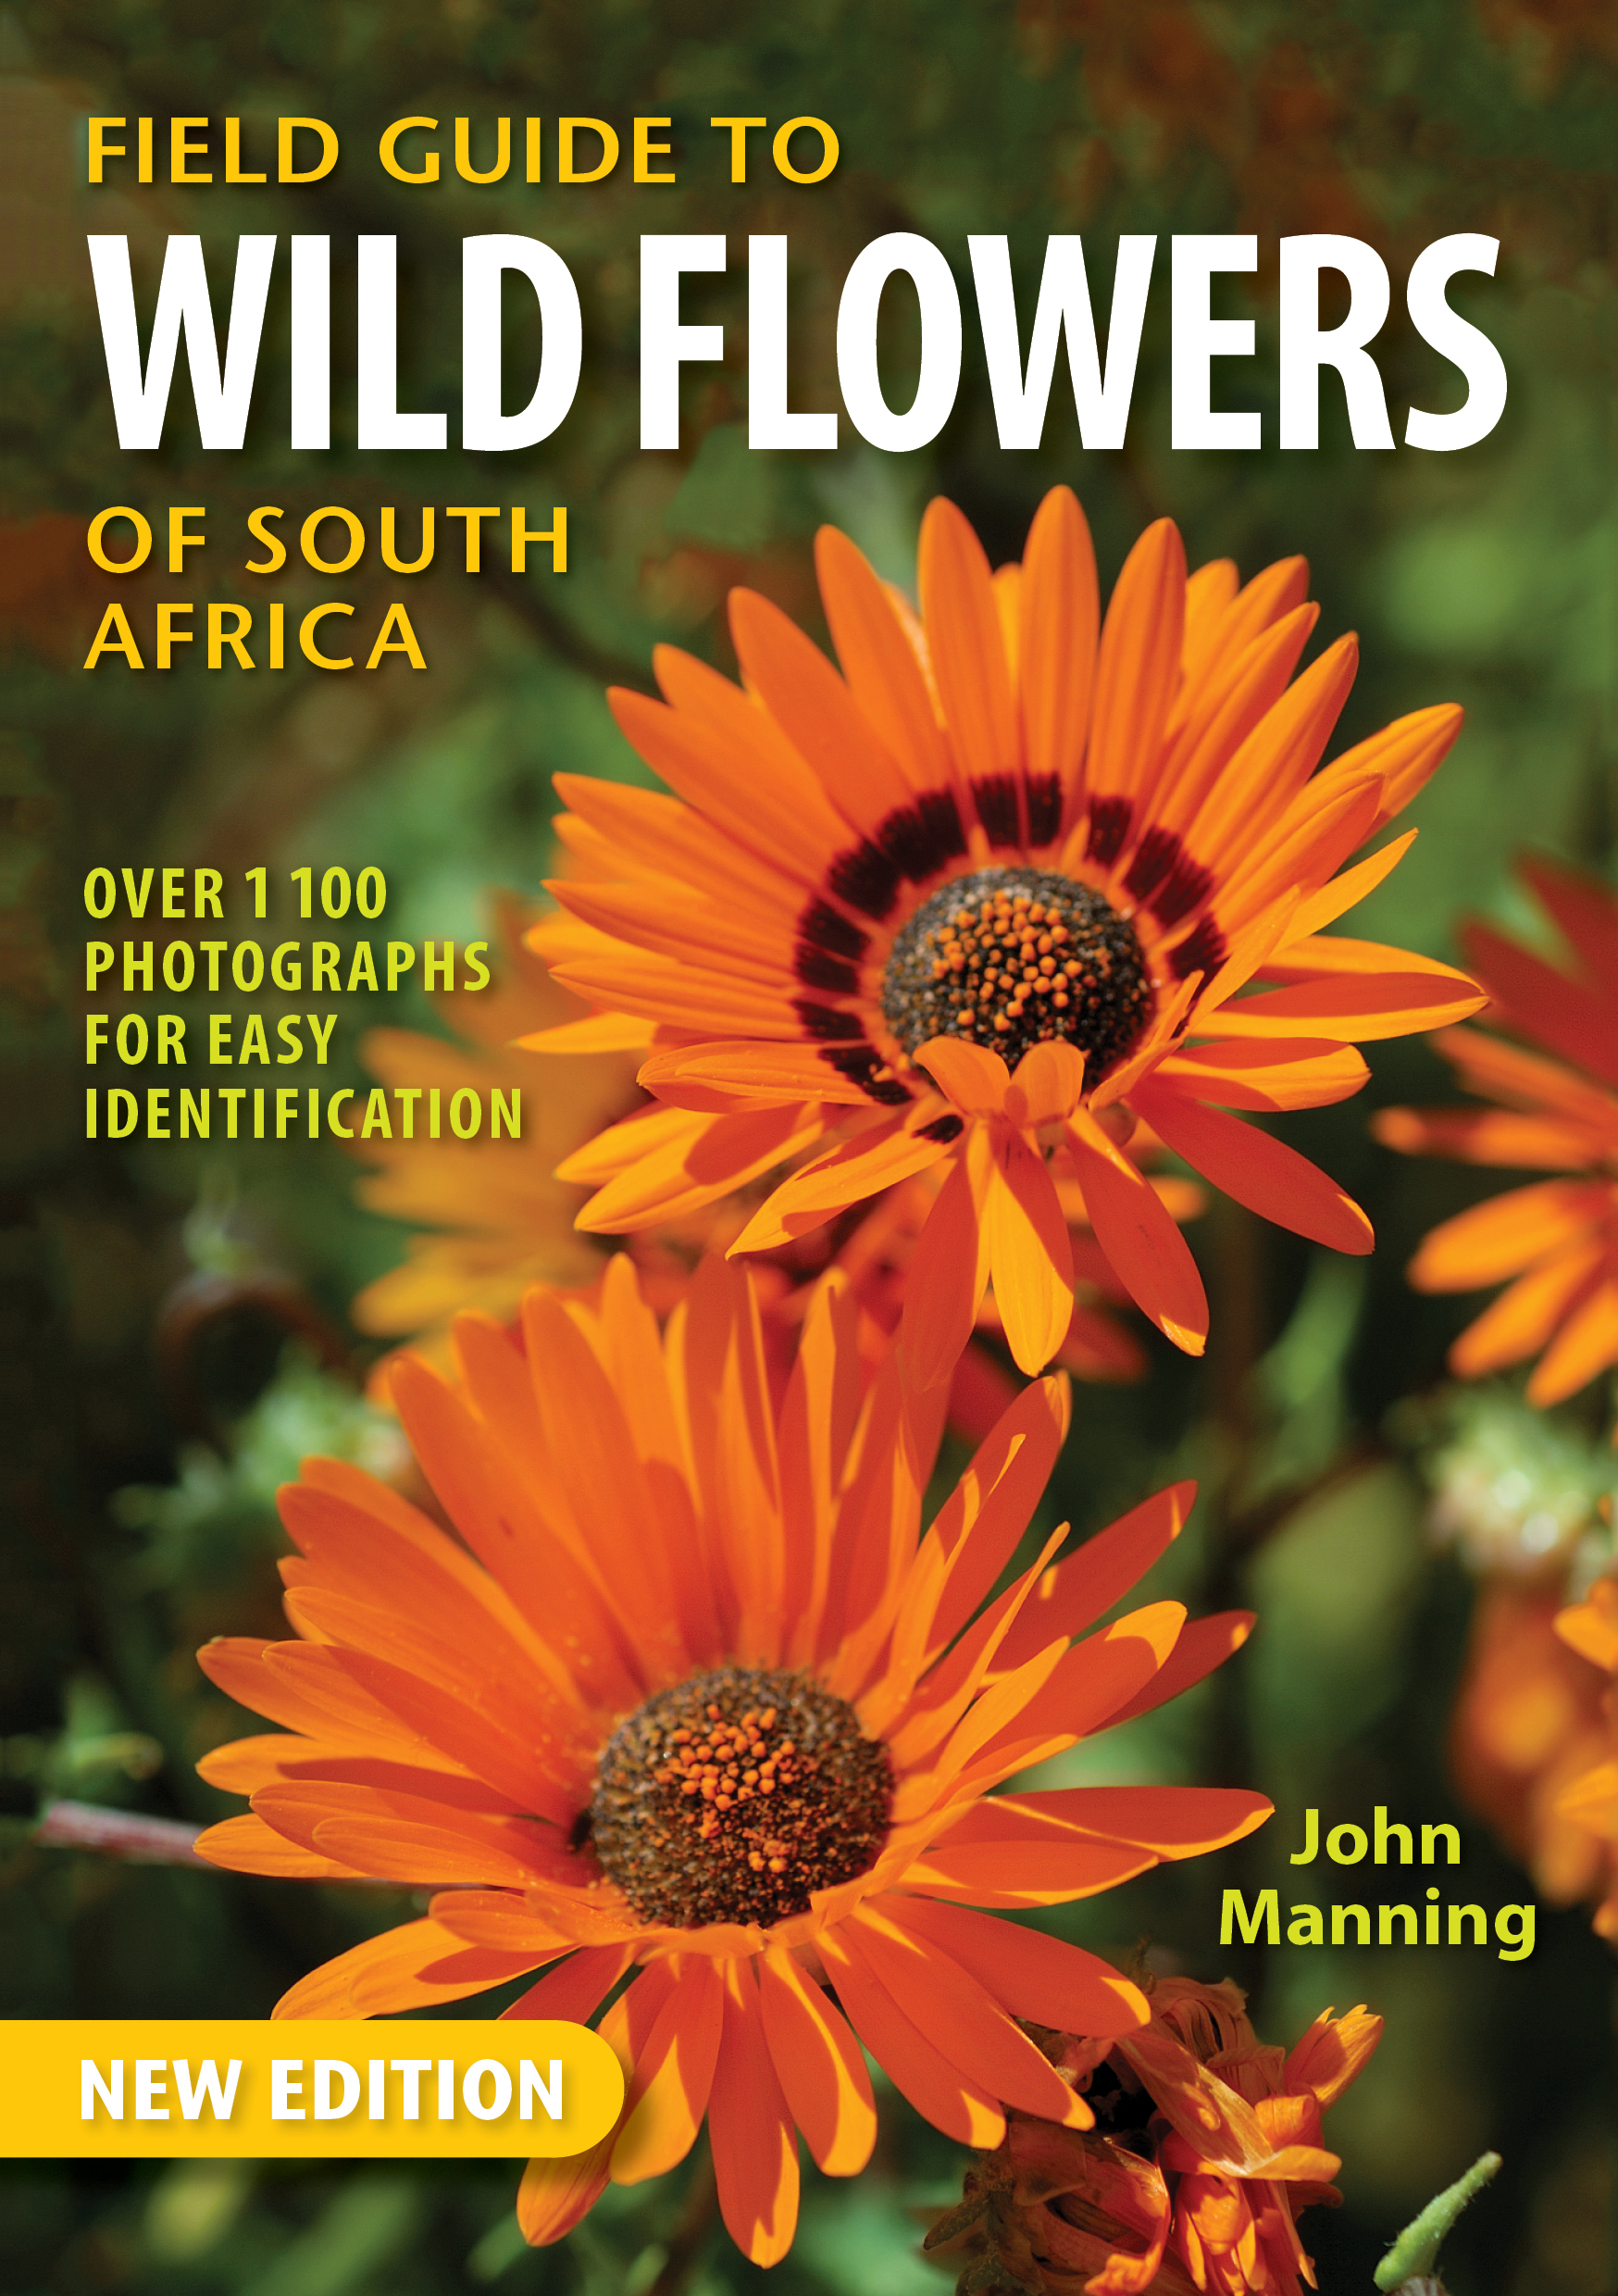 Field Guide to Wild Flowers of South Africa by Manning ...